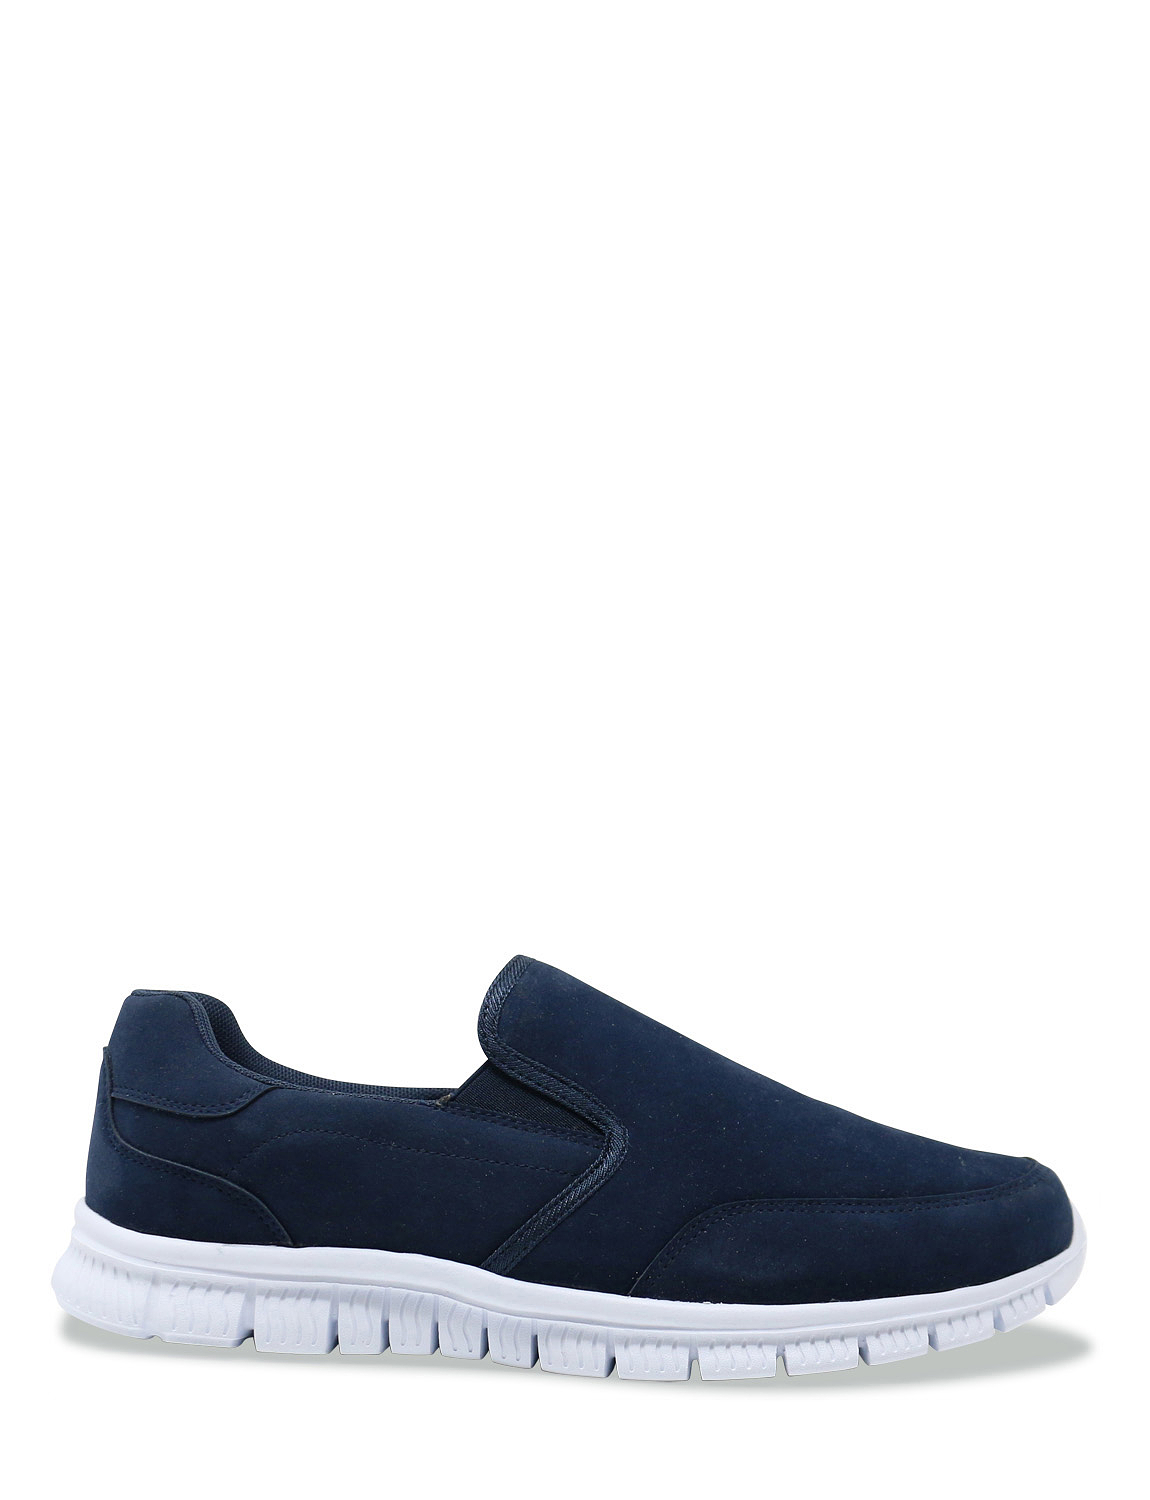 Cushion Walk Wide Fit Slip On Trainers With Memory Foam | Chums